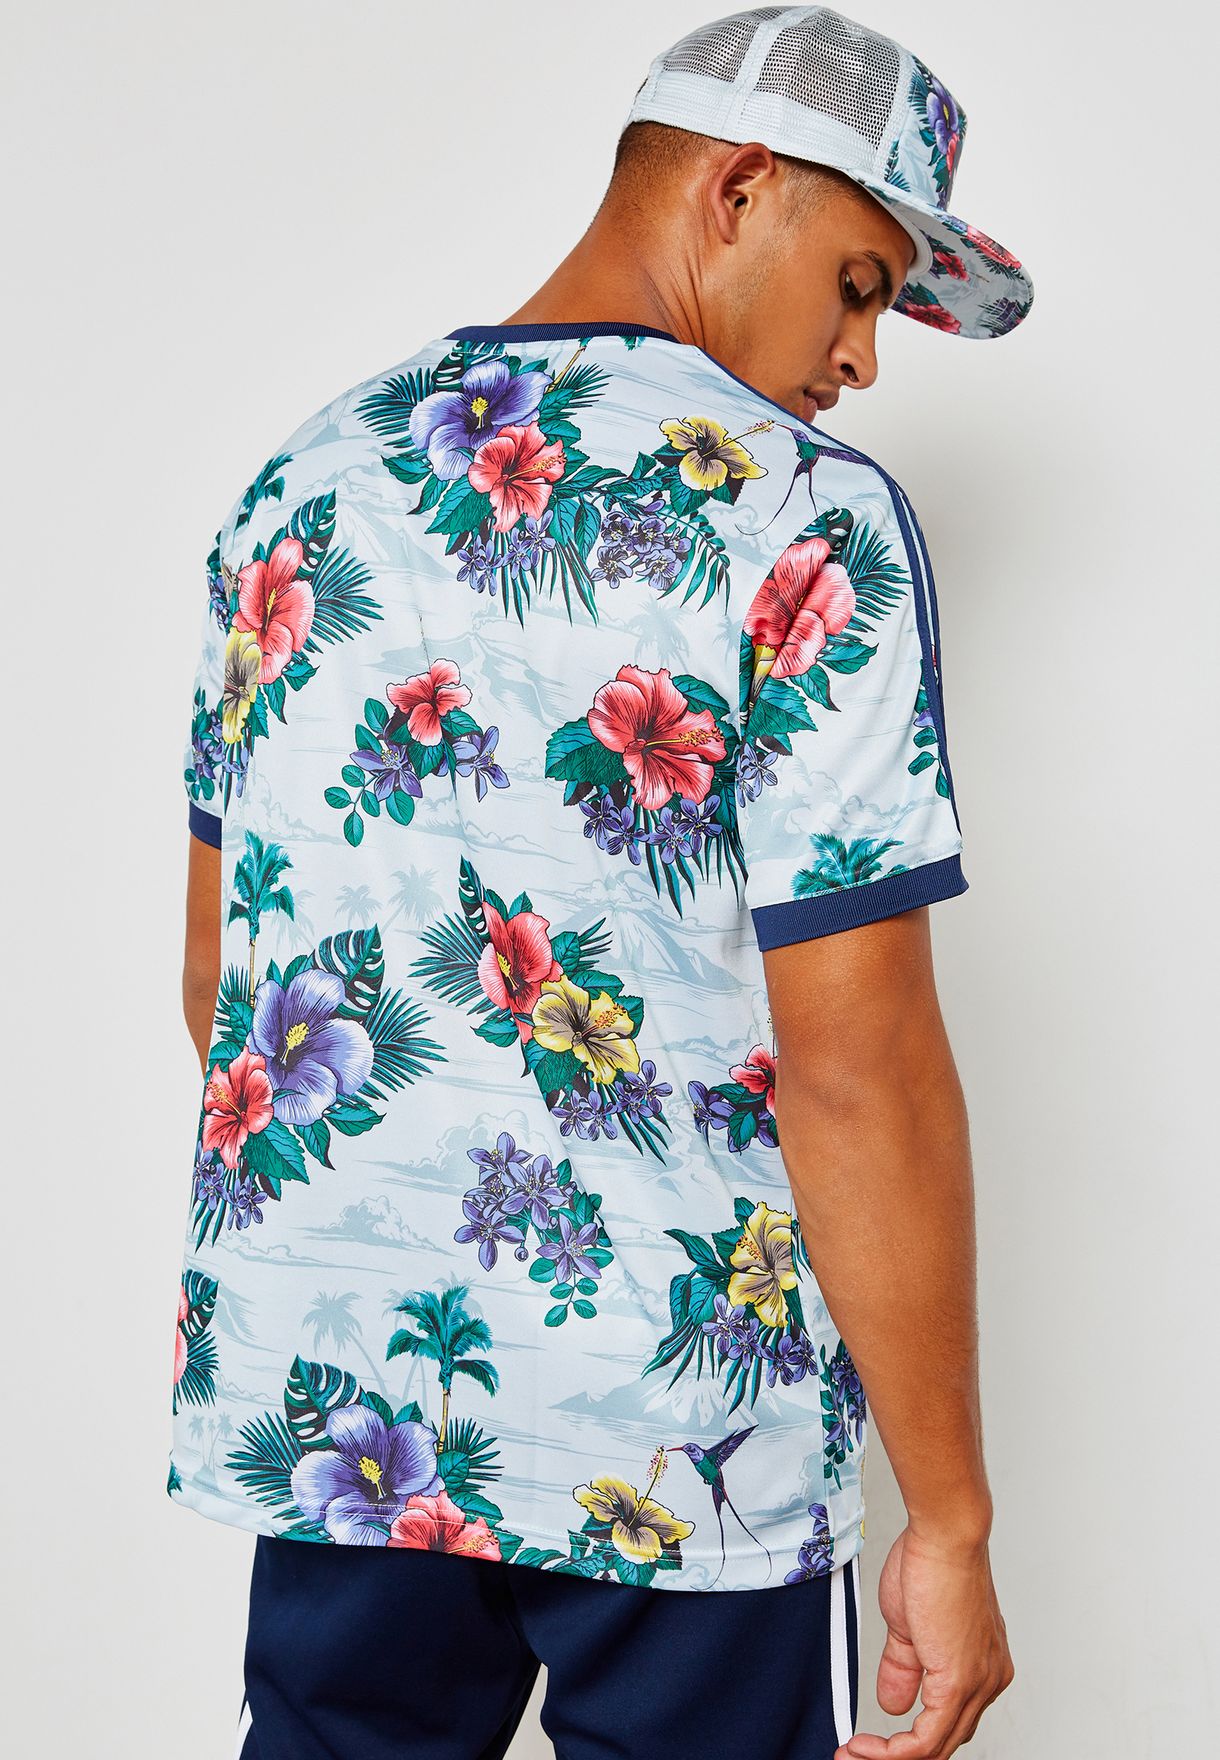 adidas floral jersey